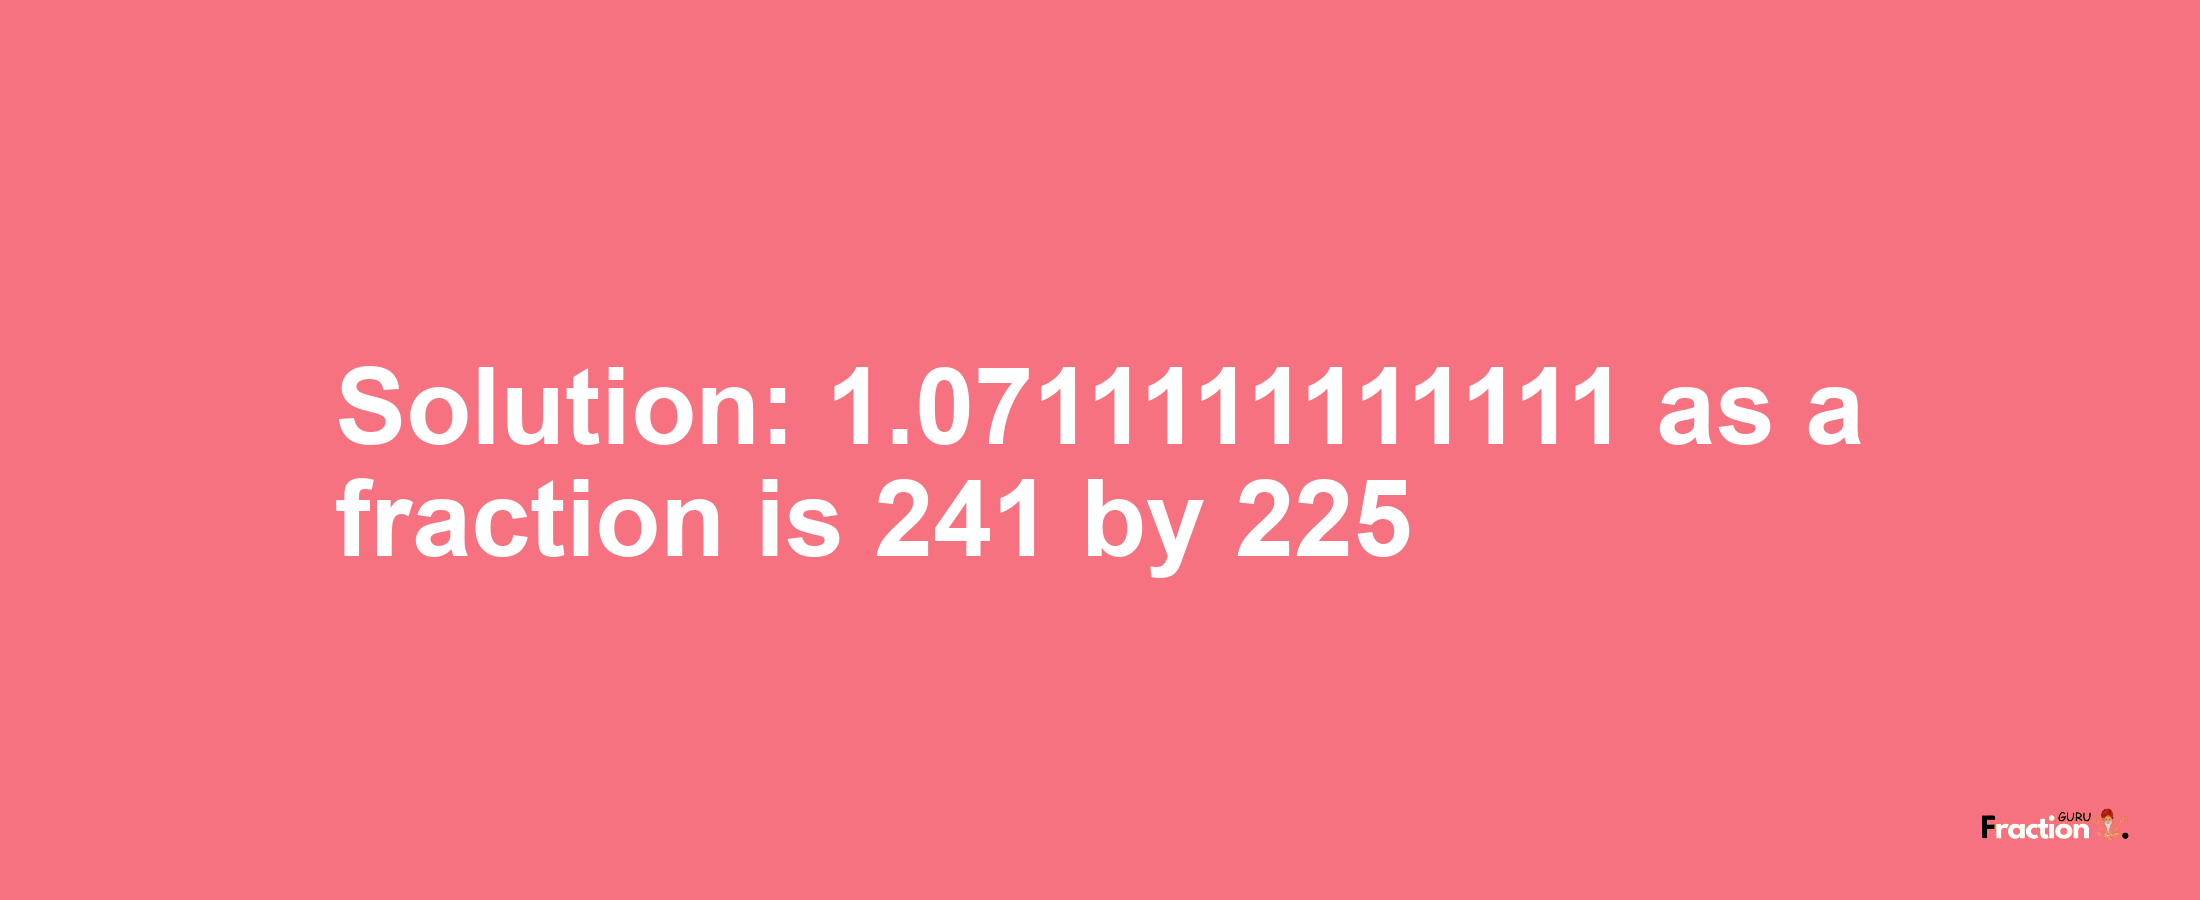 Solution:1.0711111111111 as a fraction is 241/225